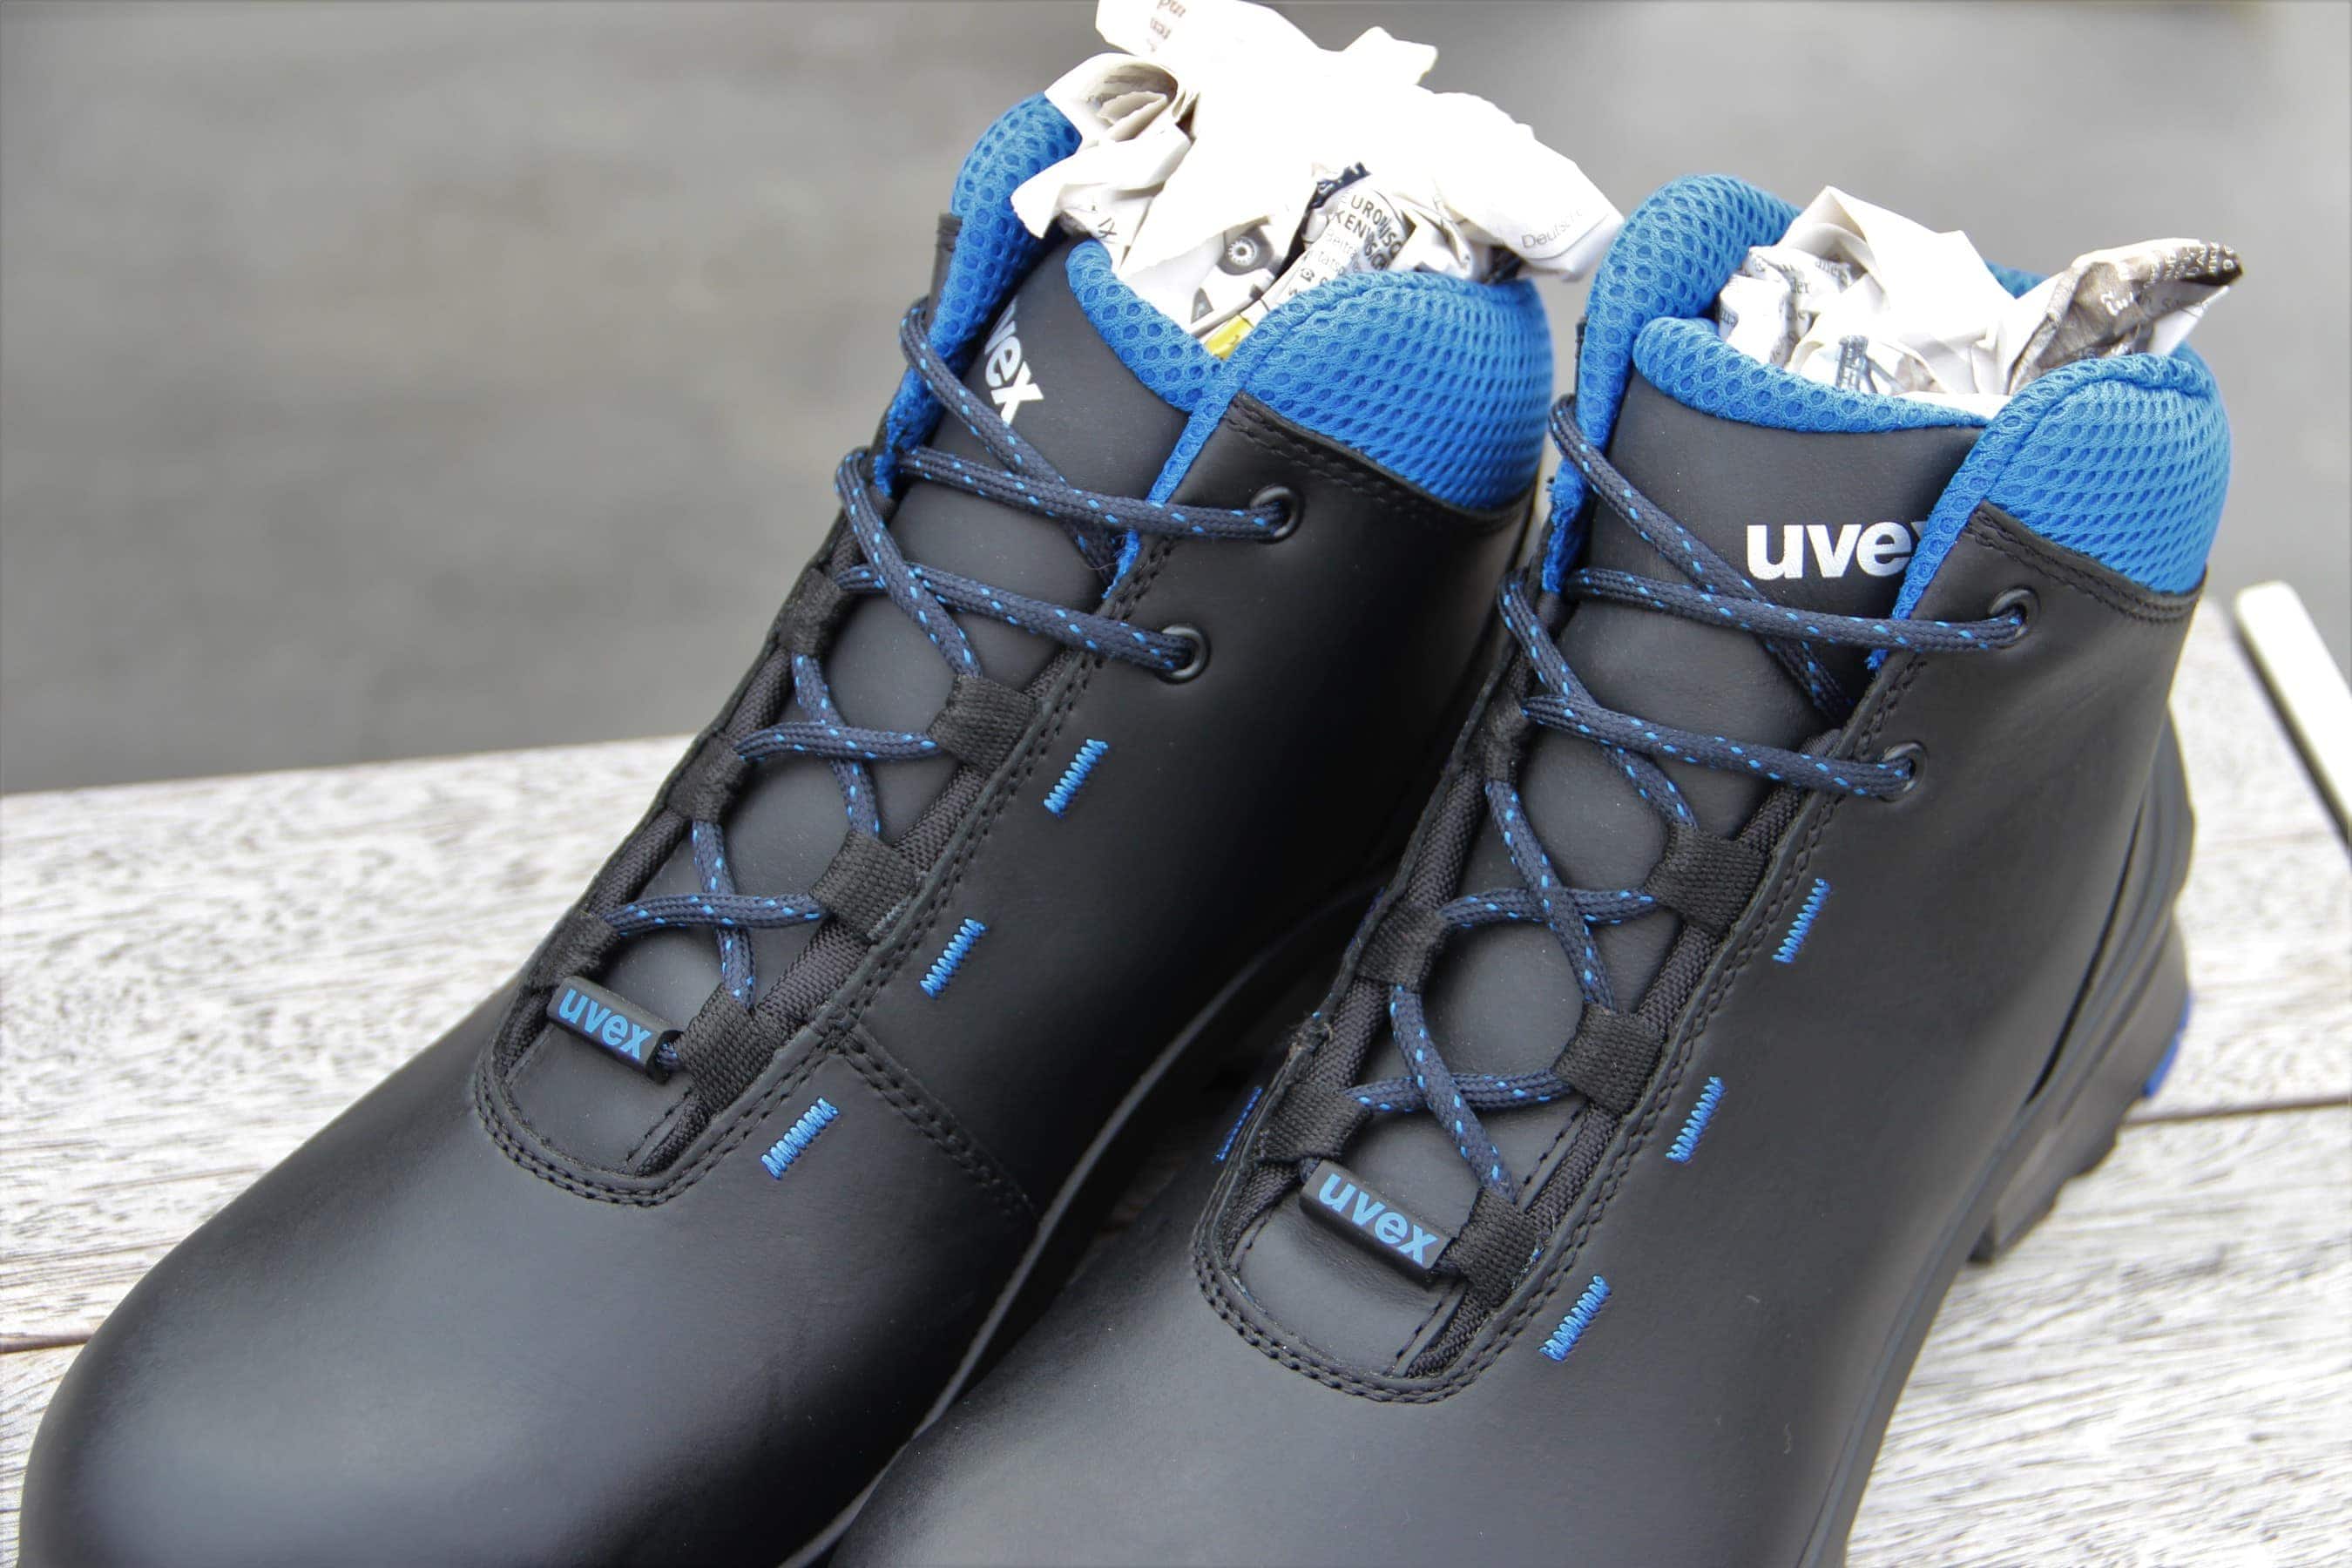 uvex safety boots